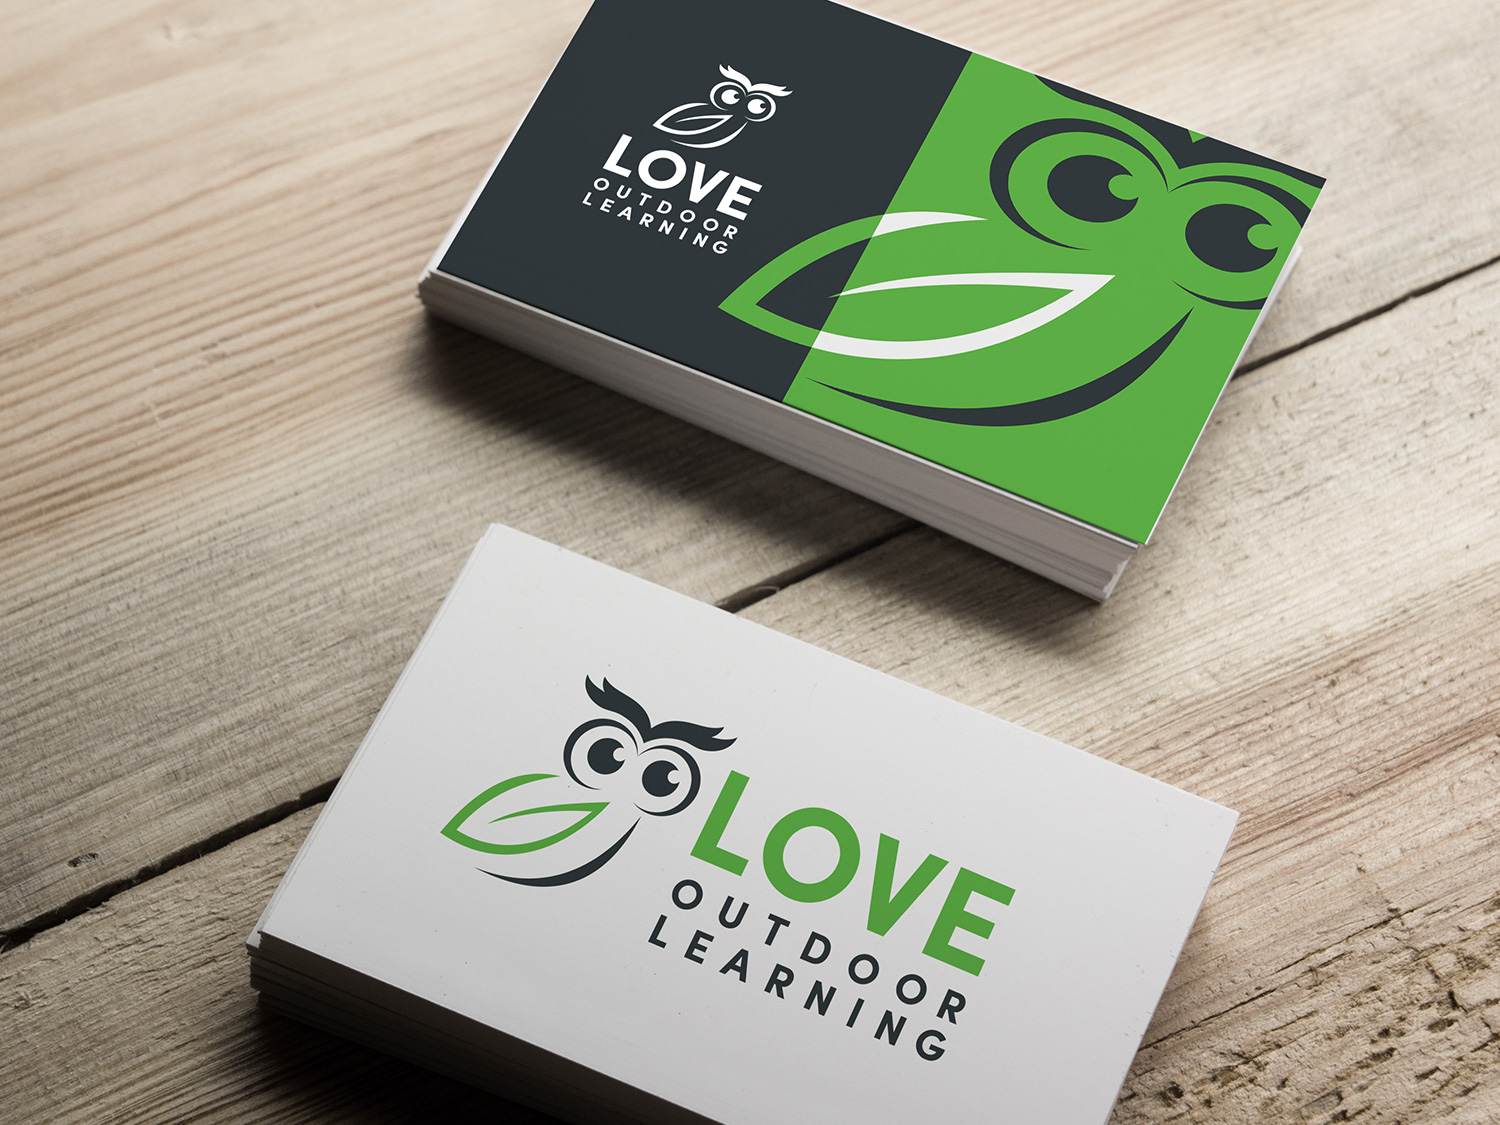 Love Outdoor Learning Brand Identity